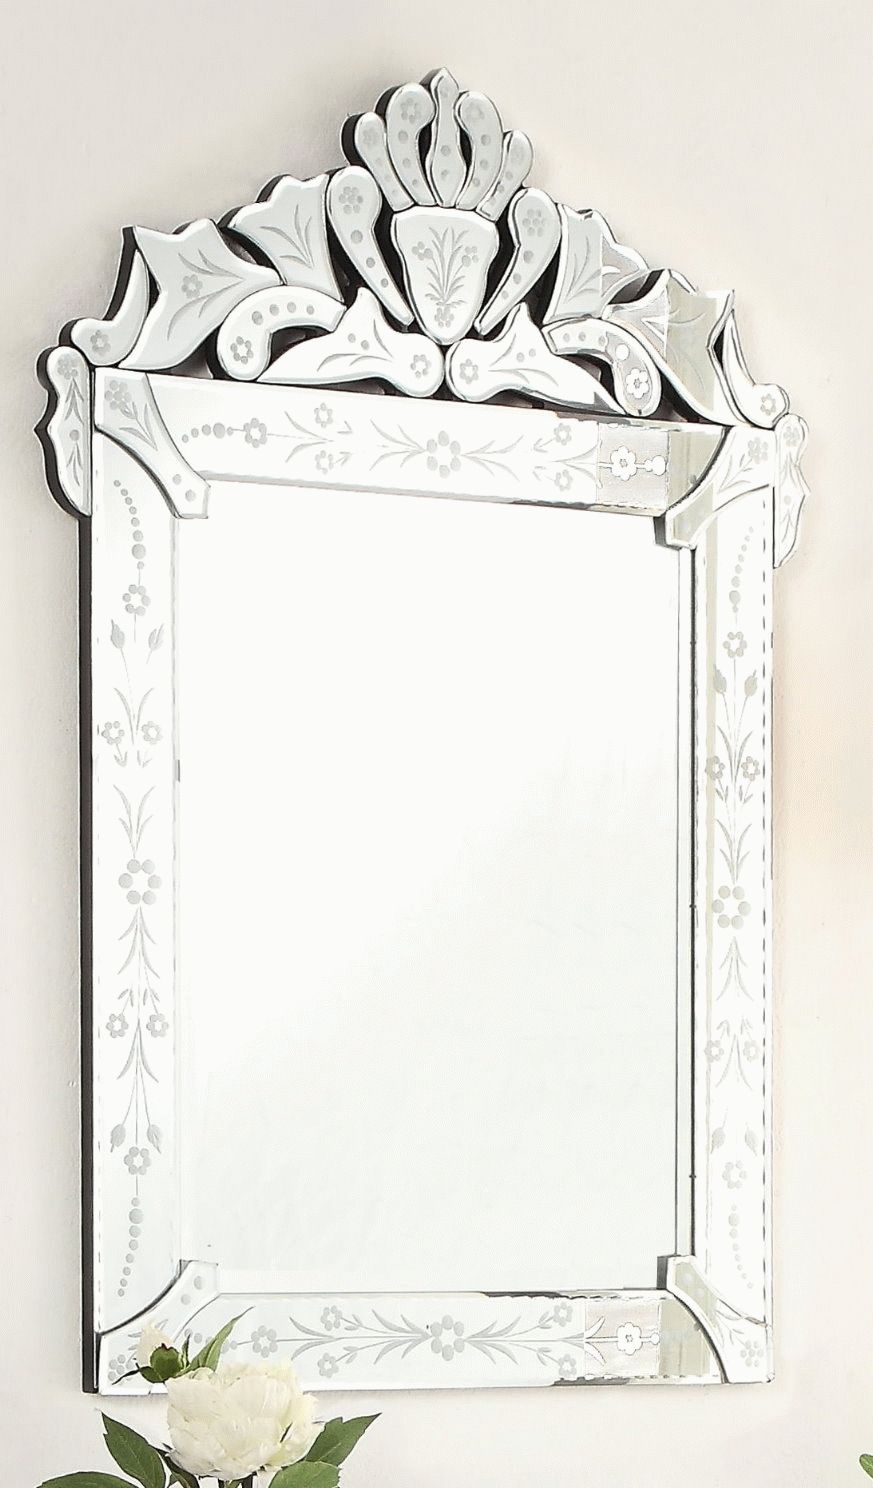 Irsina 25 Inch Venetian Style Wall Mirror Ym 702 2536 With Regard To Venetian Style Wall Mirror (View 3 of 20)